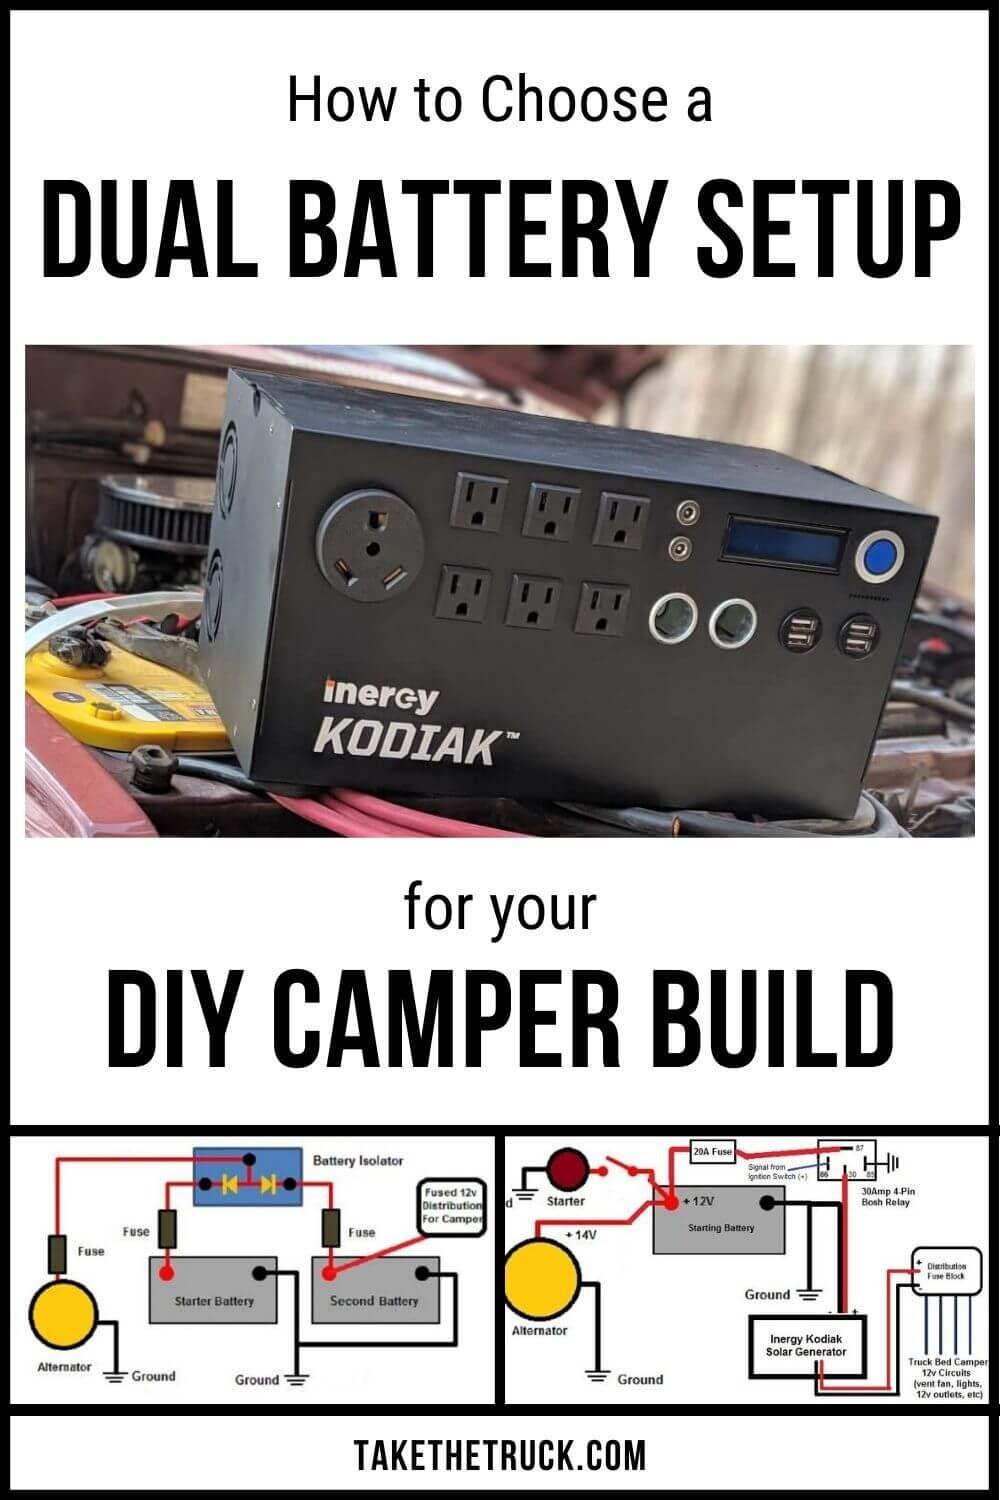 A dual battery setup can provide a reliable way to meet your electrical needs while camping off-grid. Select the right dual battery system for your next camping or overland travel adventure.